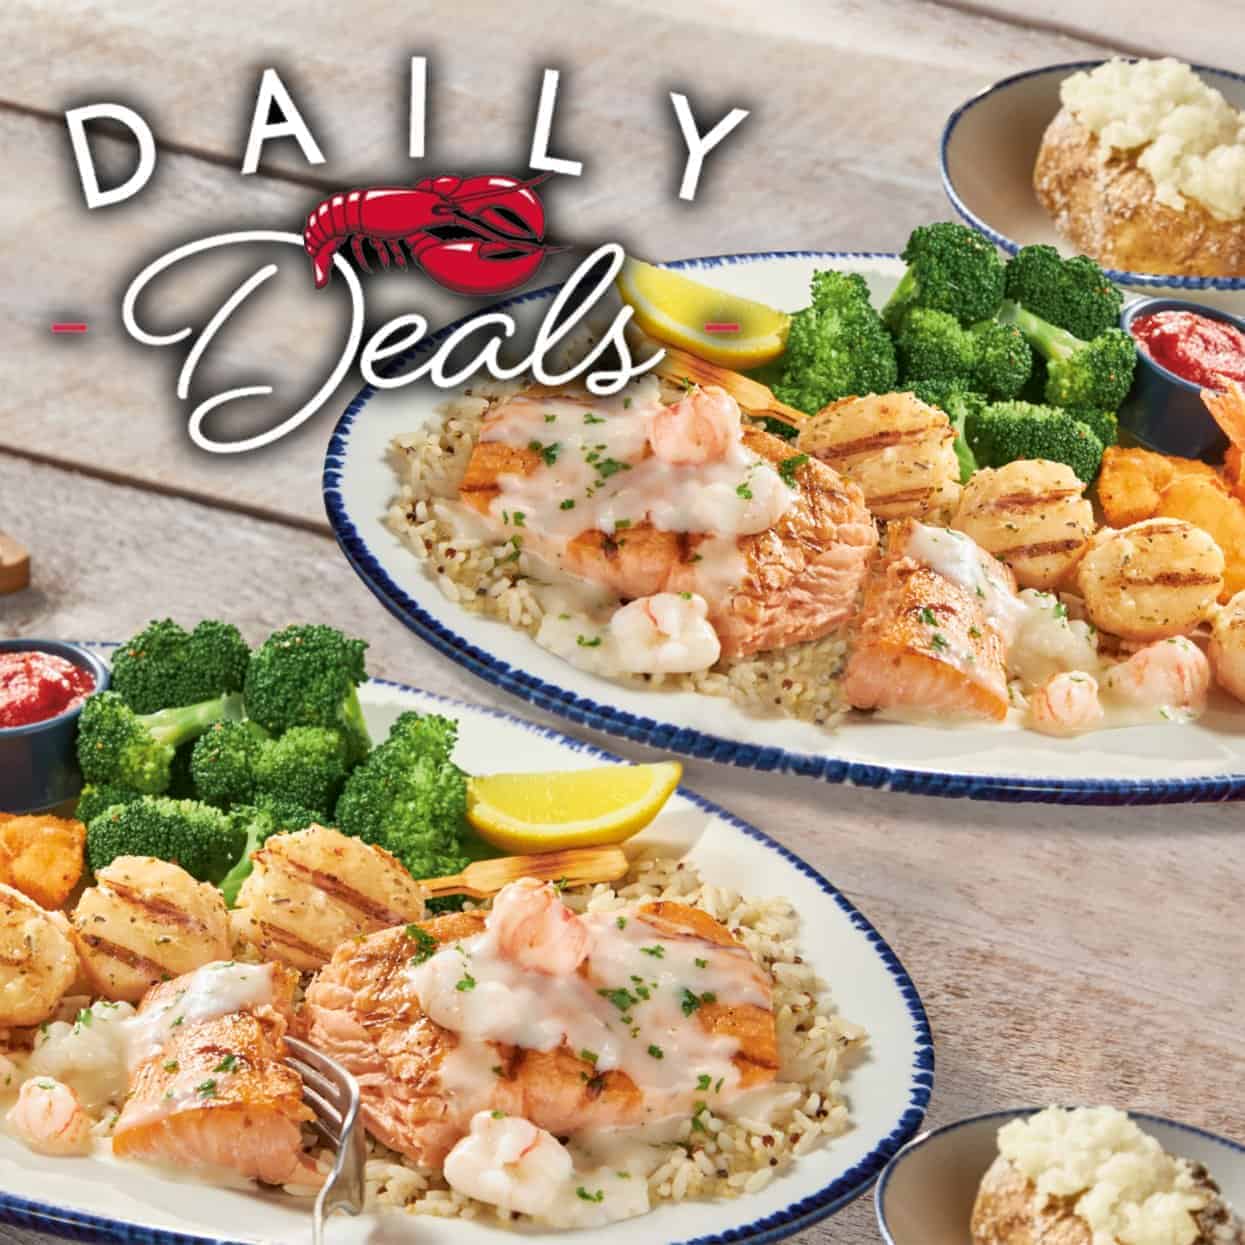 Kids eat free at Red Lobster every Tuesday Living On The Cheap